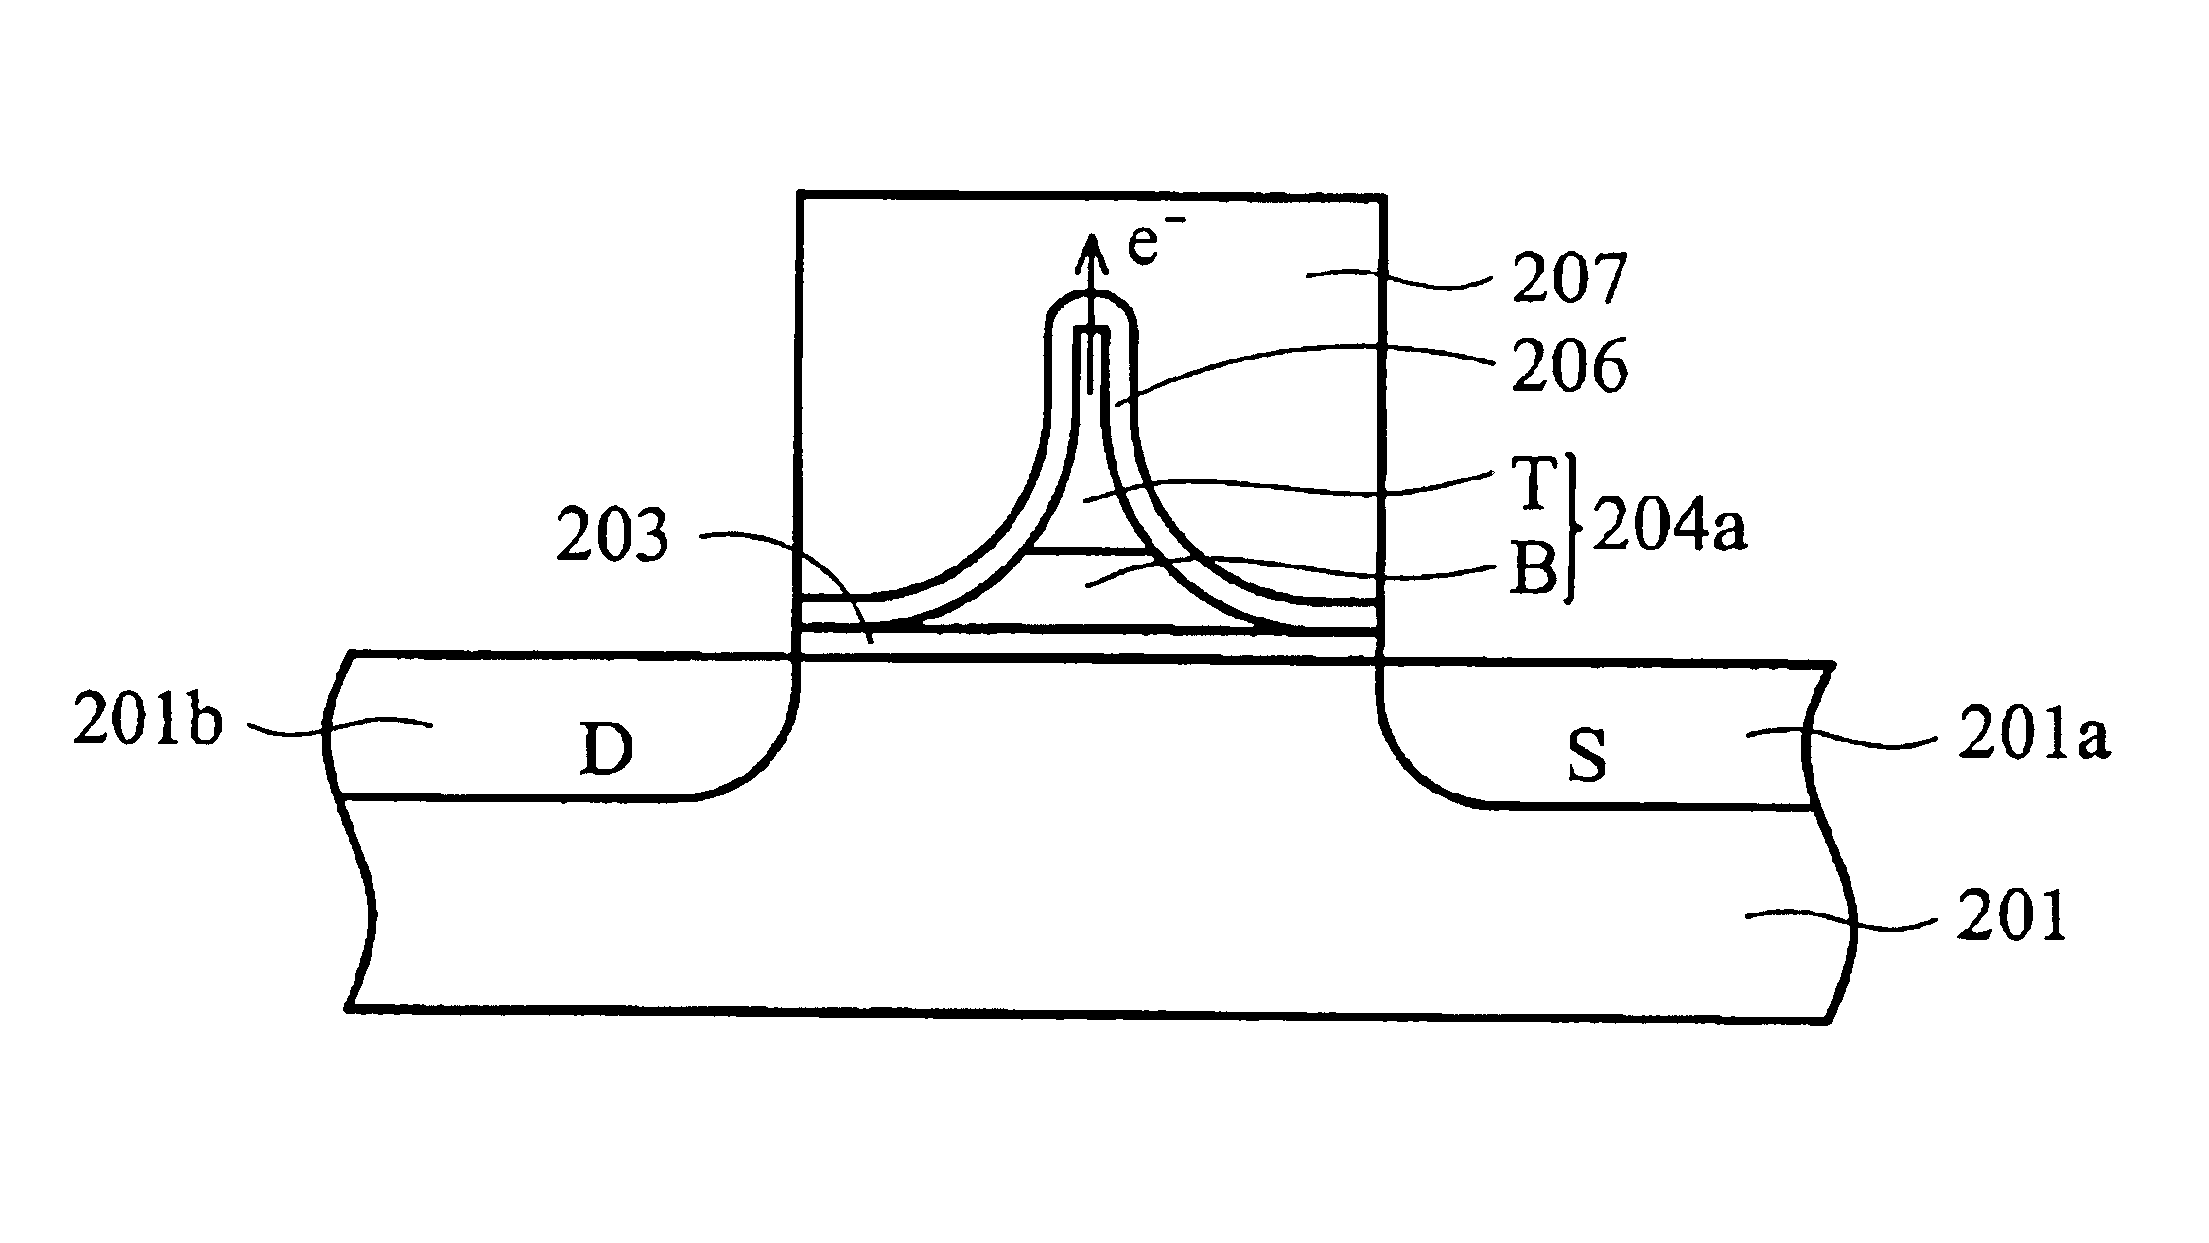 Flash memory with protruded floating gate